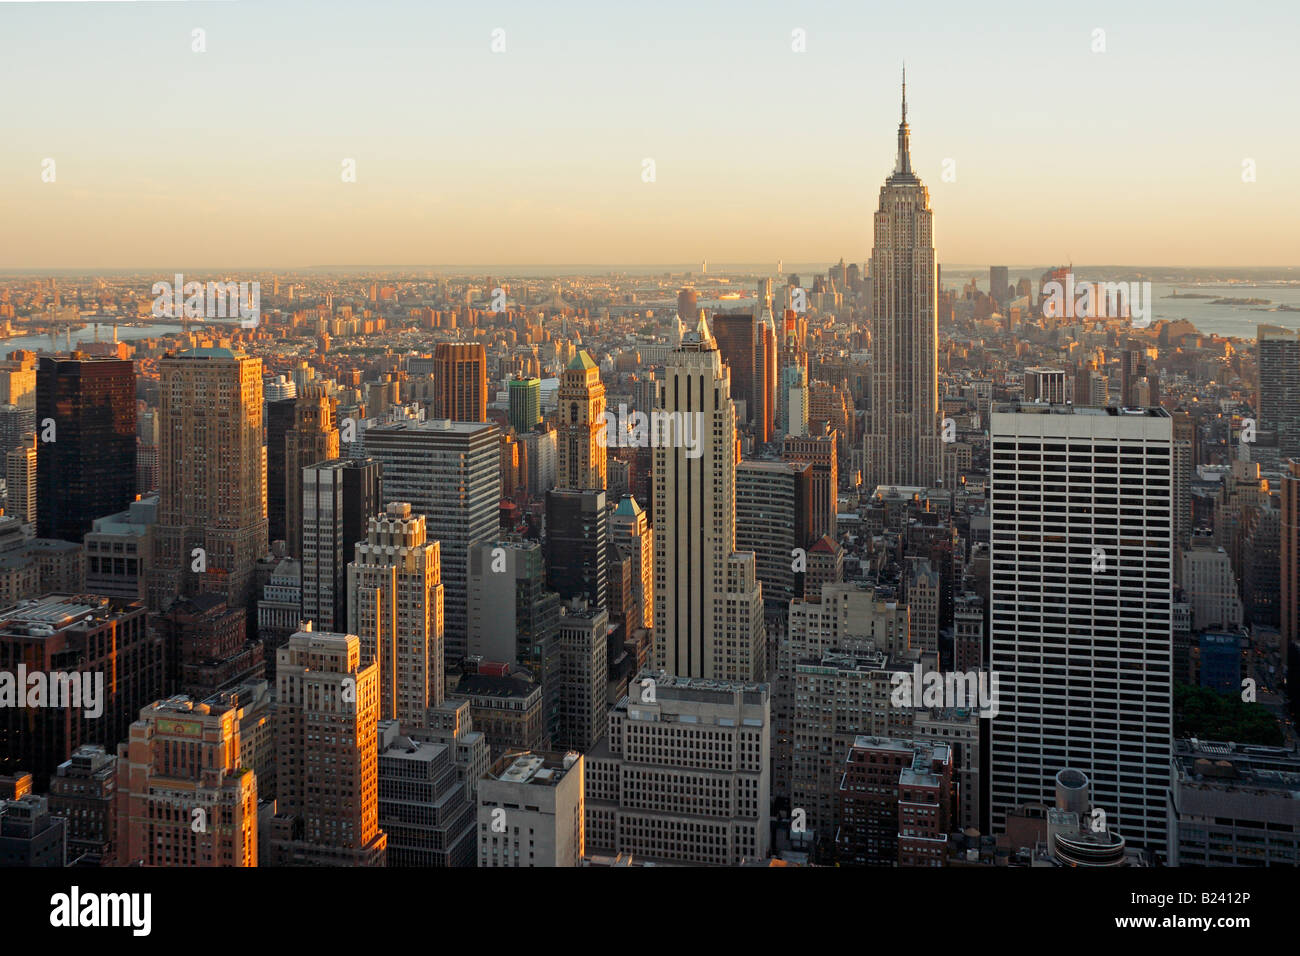 Aerial view of Manhattan cityscape at dusk from the top of the Rockefeller Center - New York City, USA Stock Photo